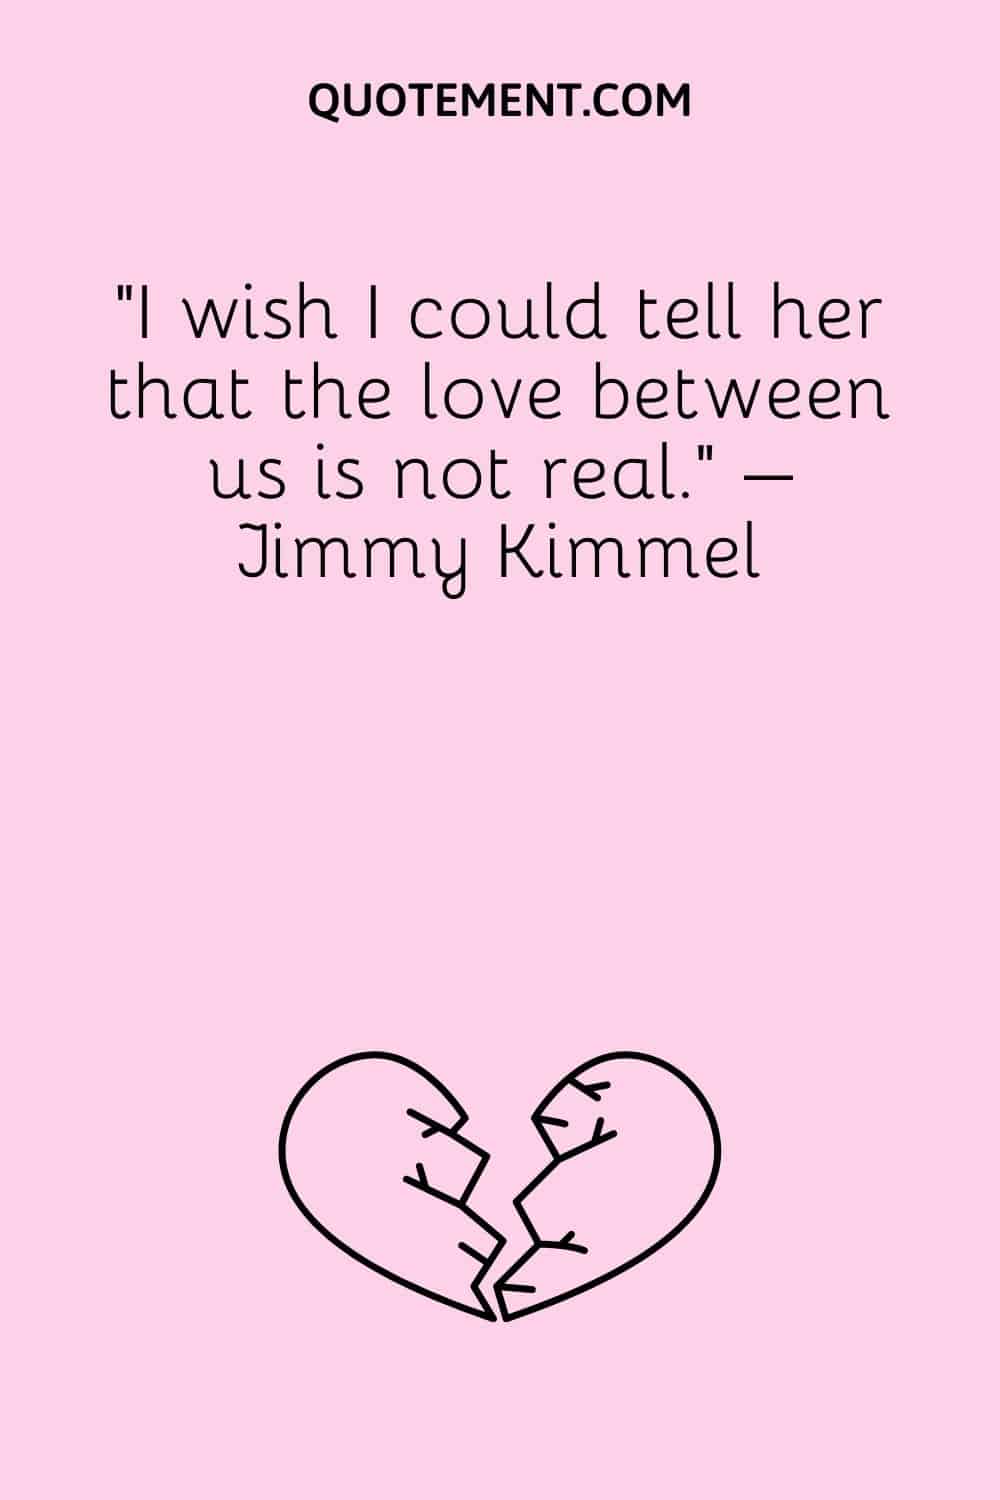 “I wish I could tell her that the love between us is not real.” – Jimmy Kimmel